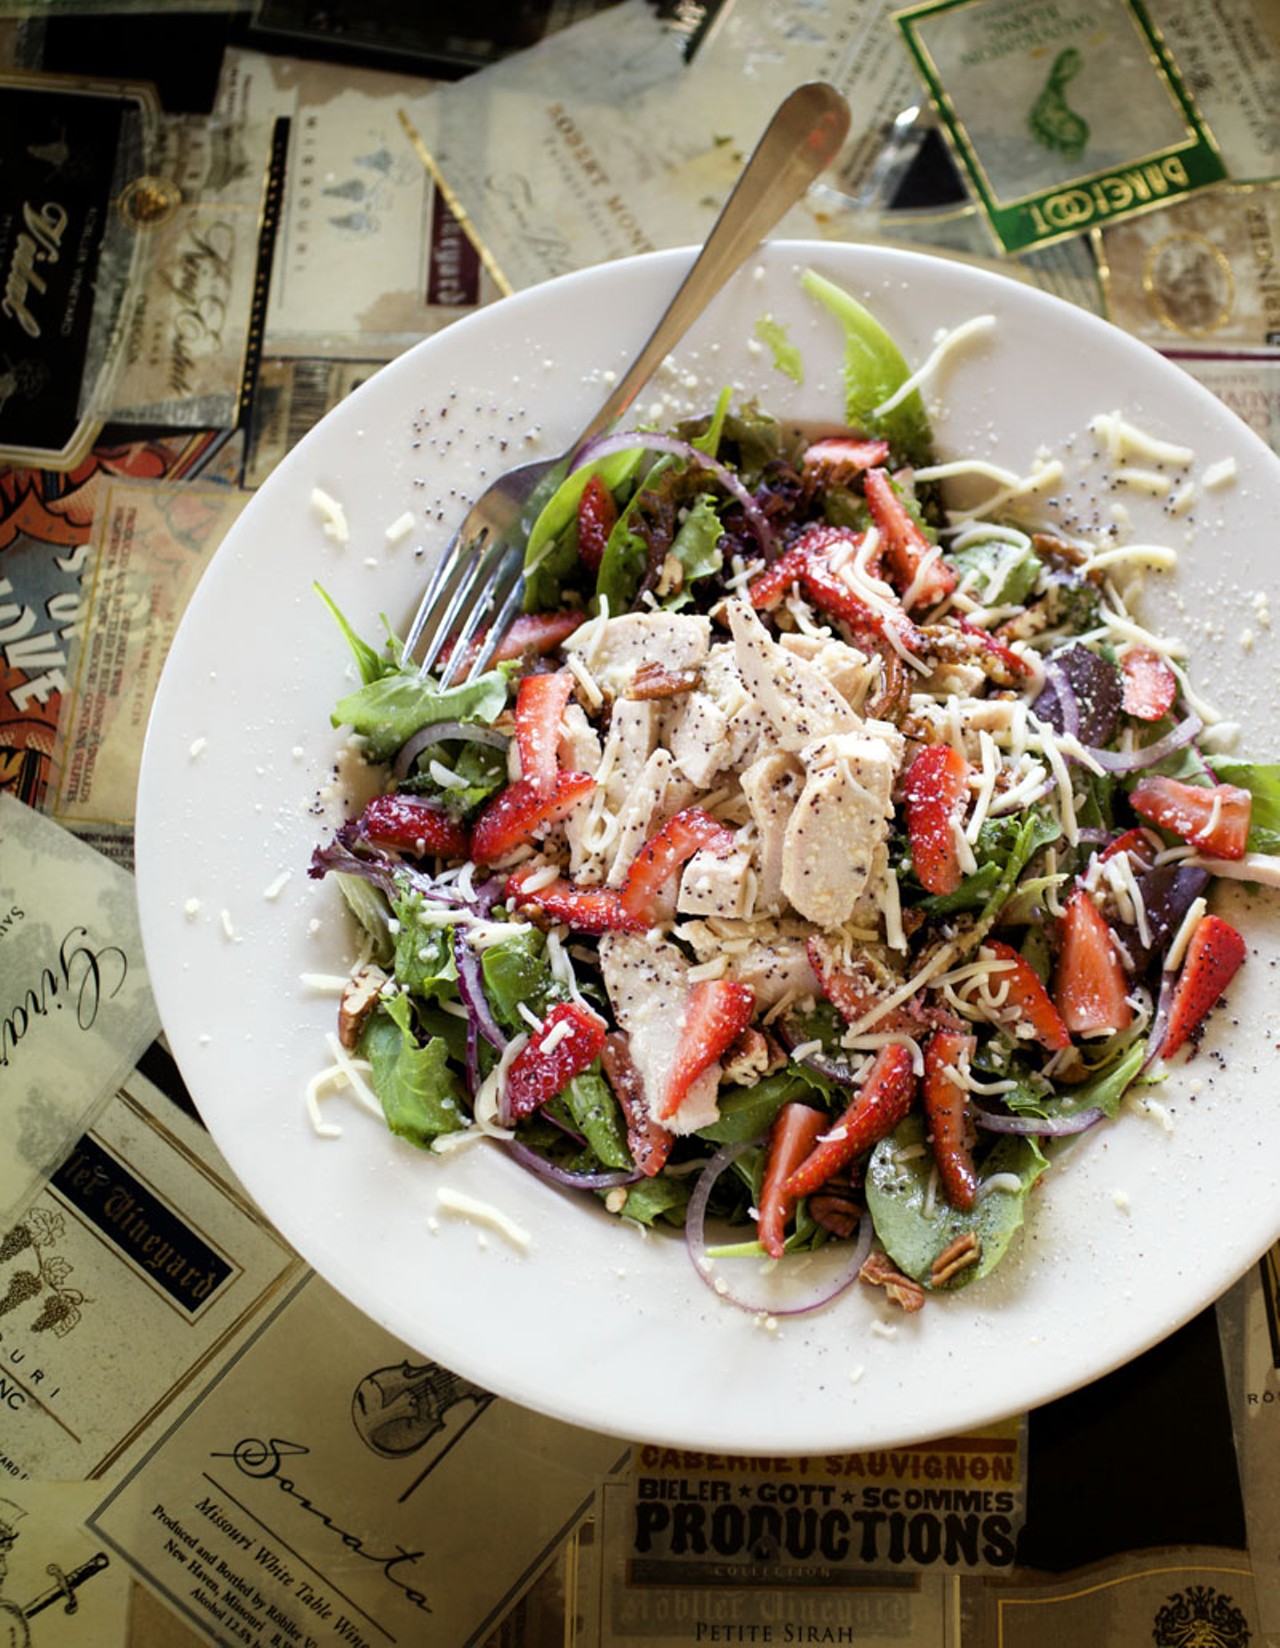 One of the summer specials at Piccadilly is the Spring Salad. It's a mesculin mix, strawberries, pecans, chicken breast and poppy seed dressing.